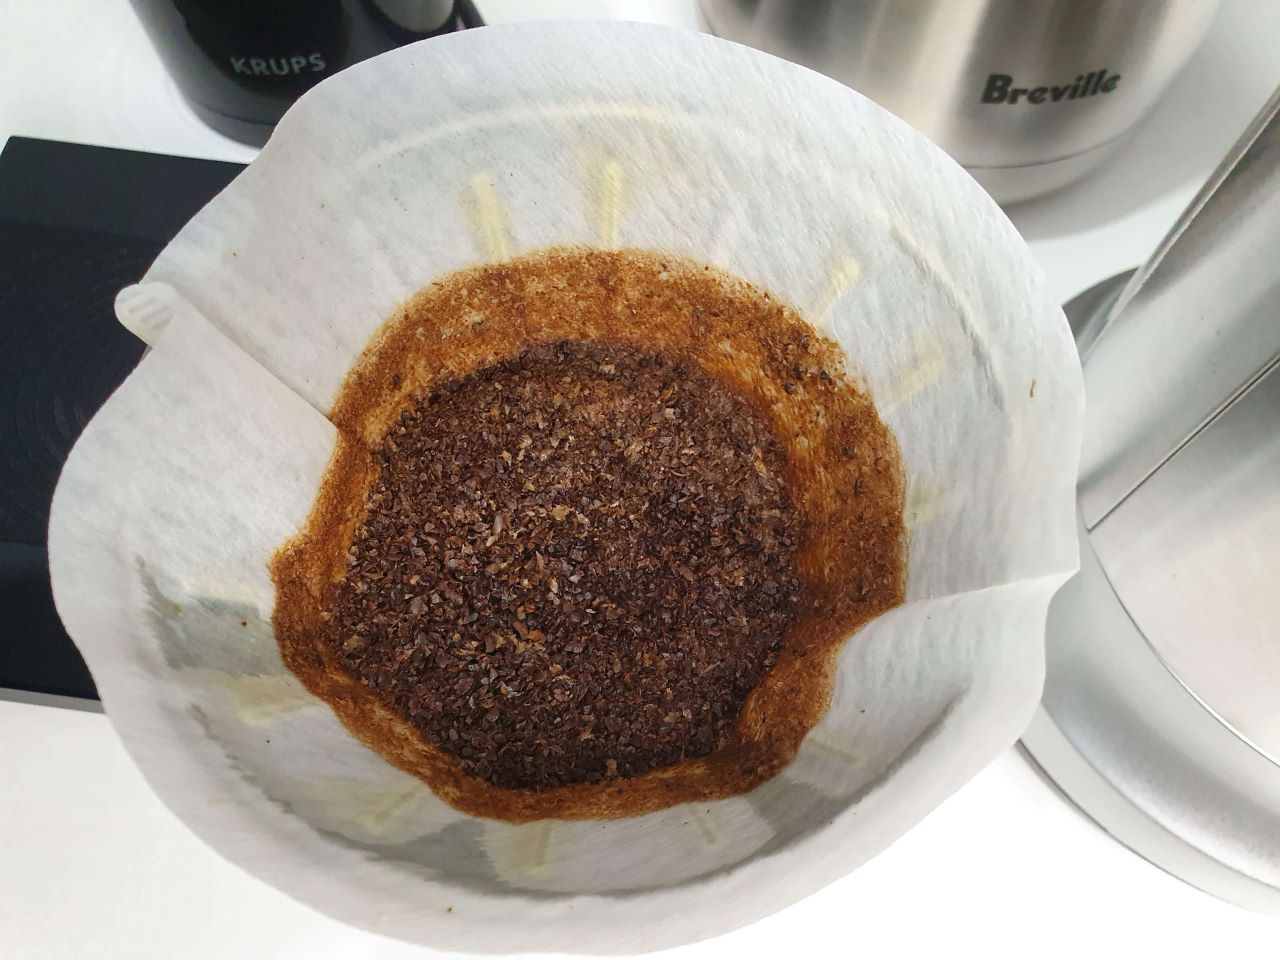 Breville precision coffee remains after using Kinto pour over kit.